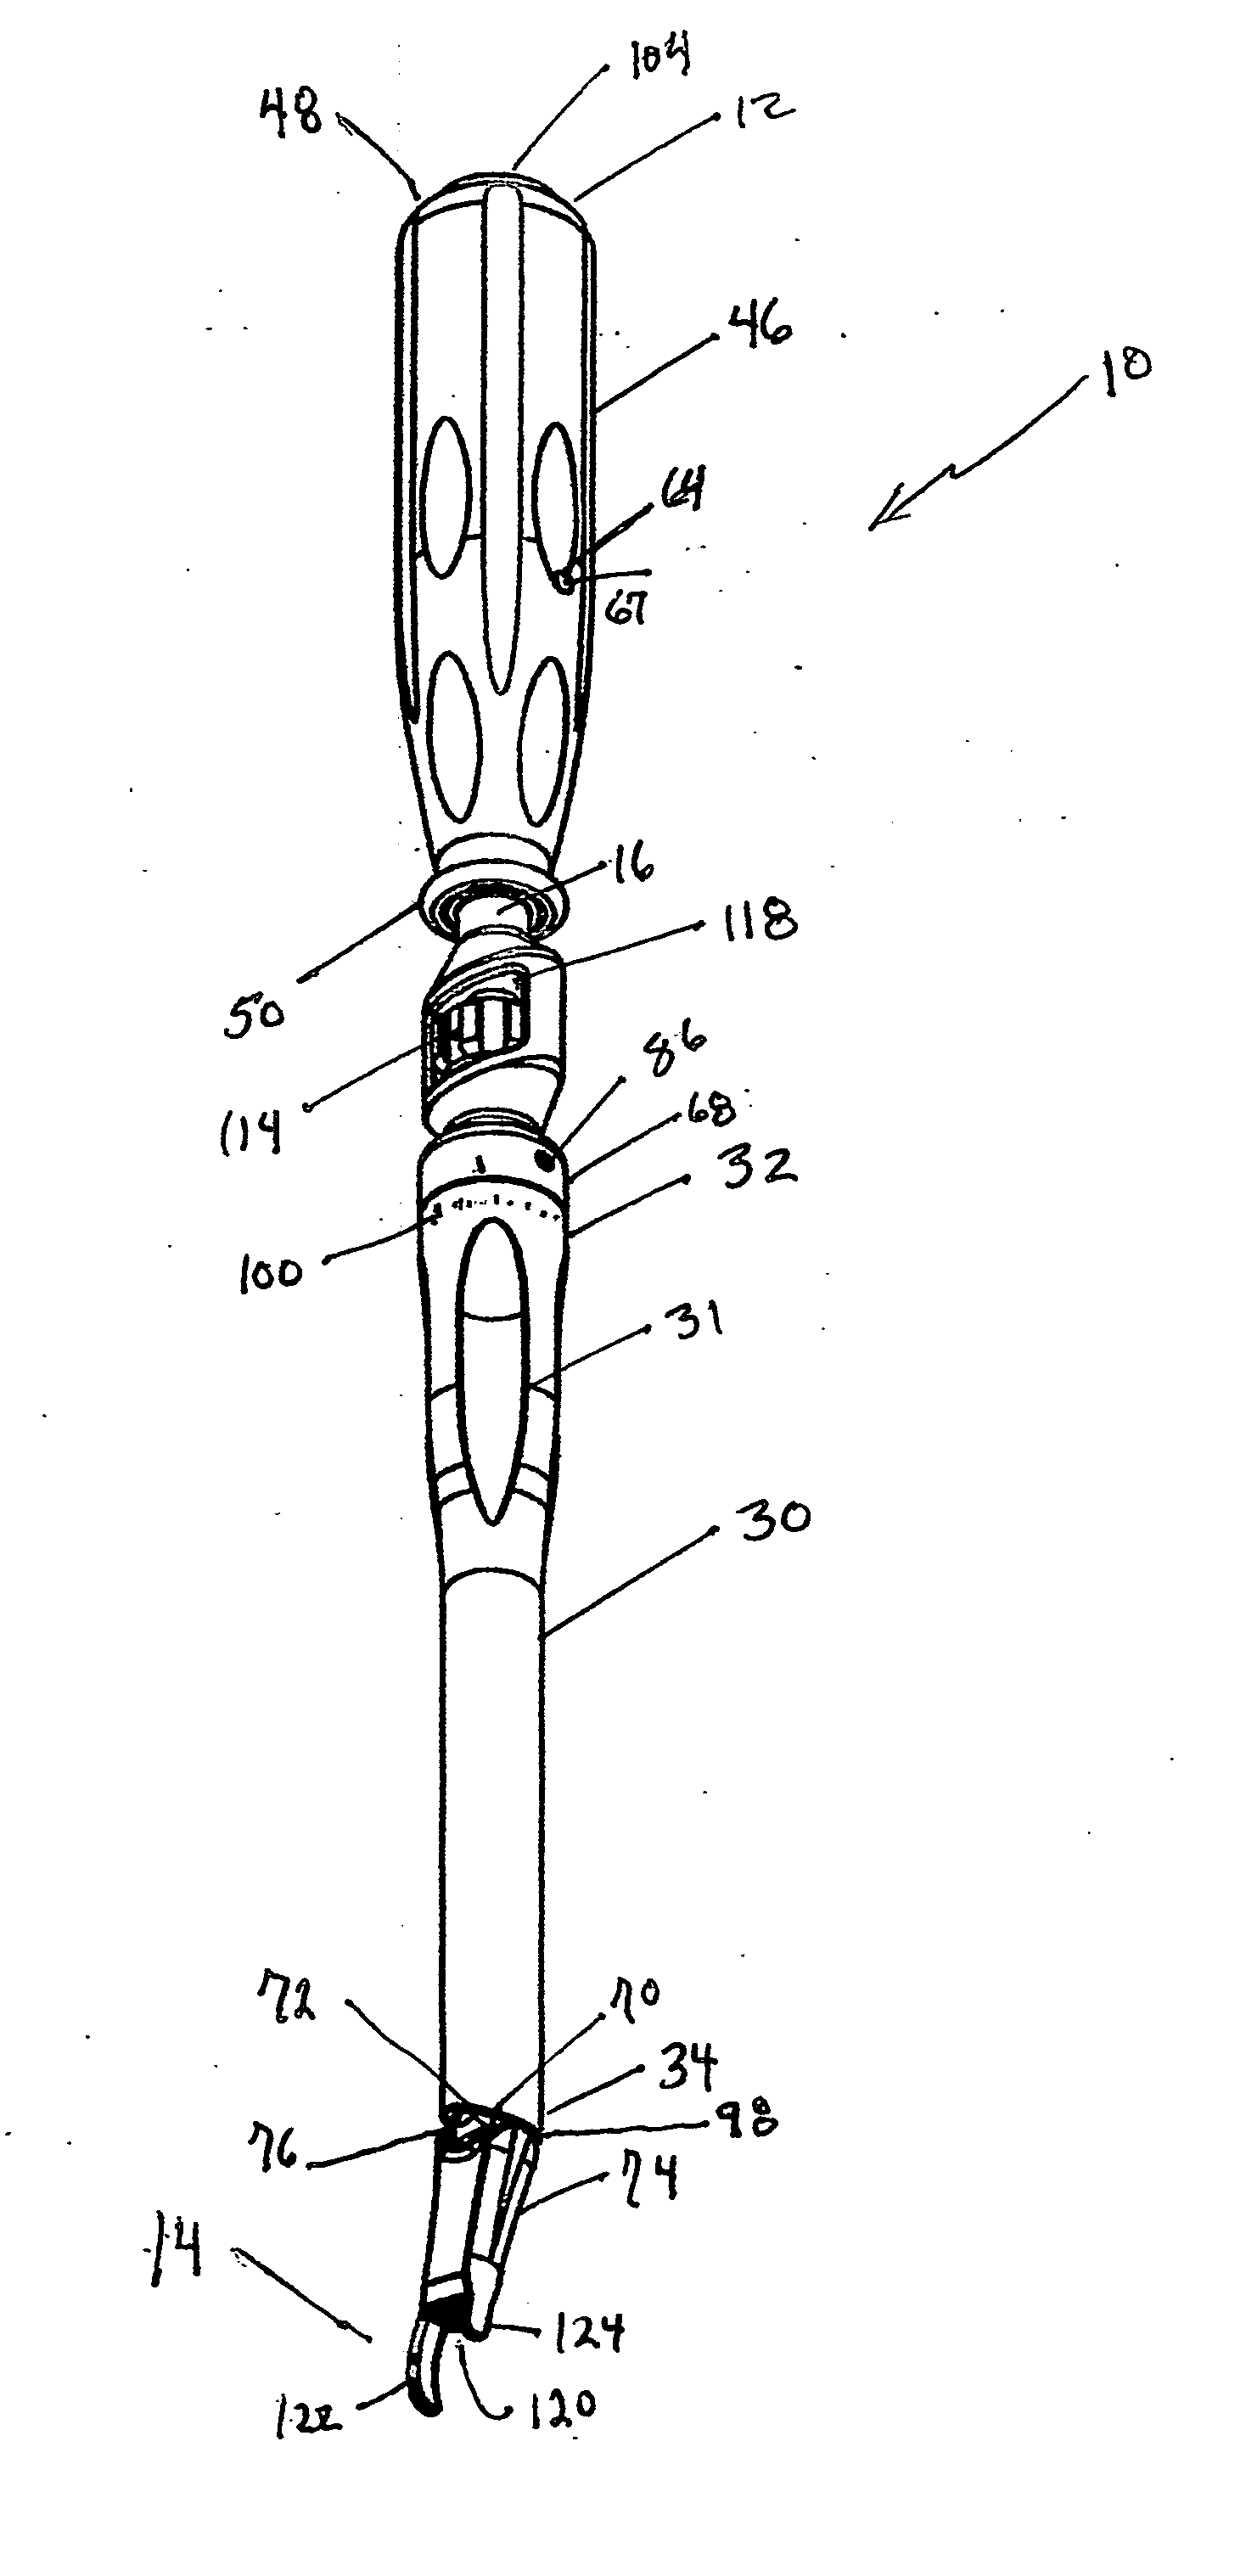 Adjustable interbody introducer device and method